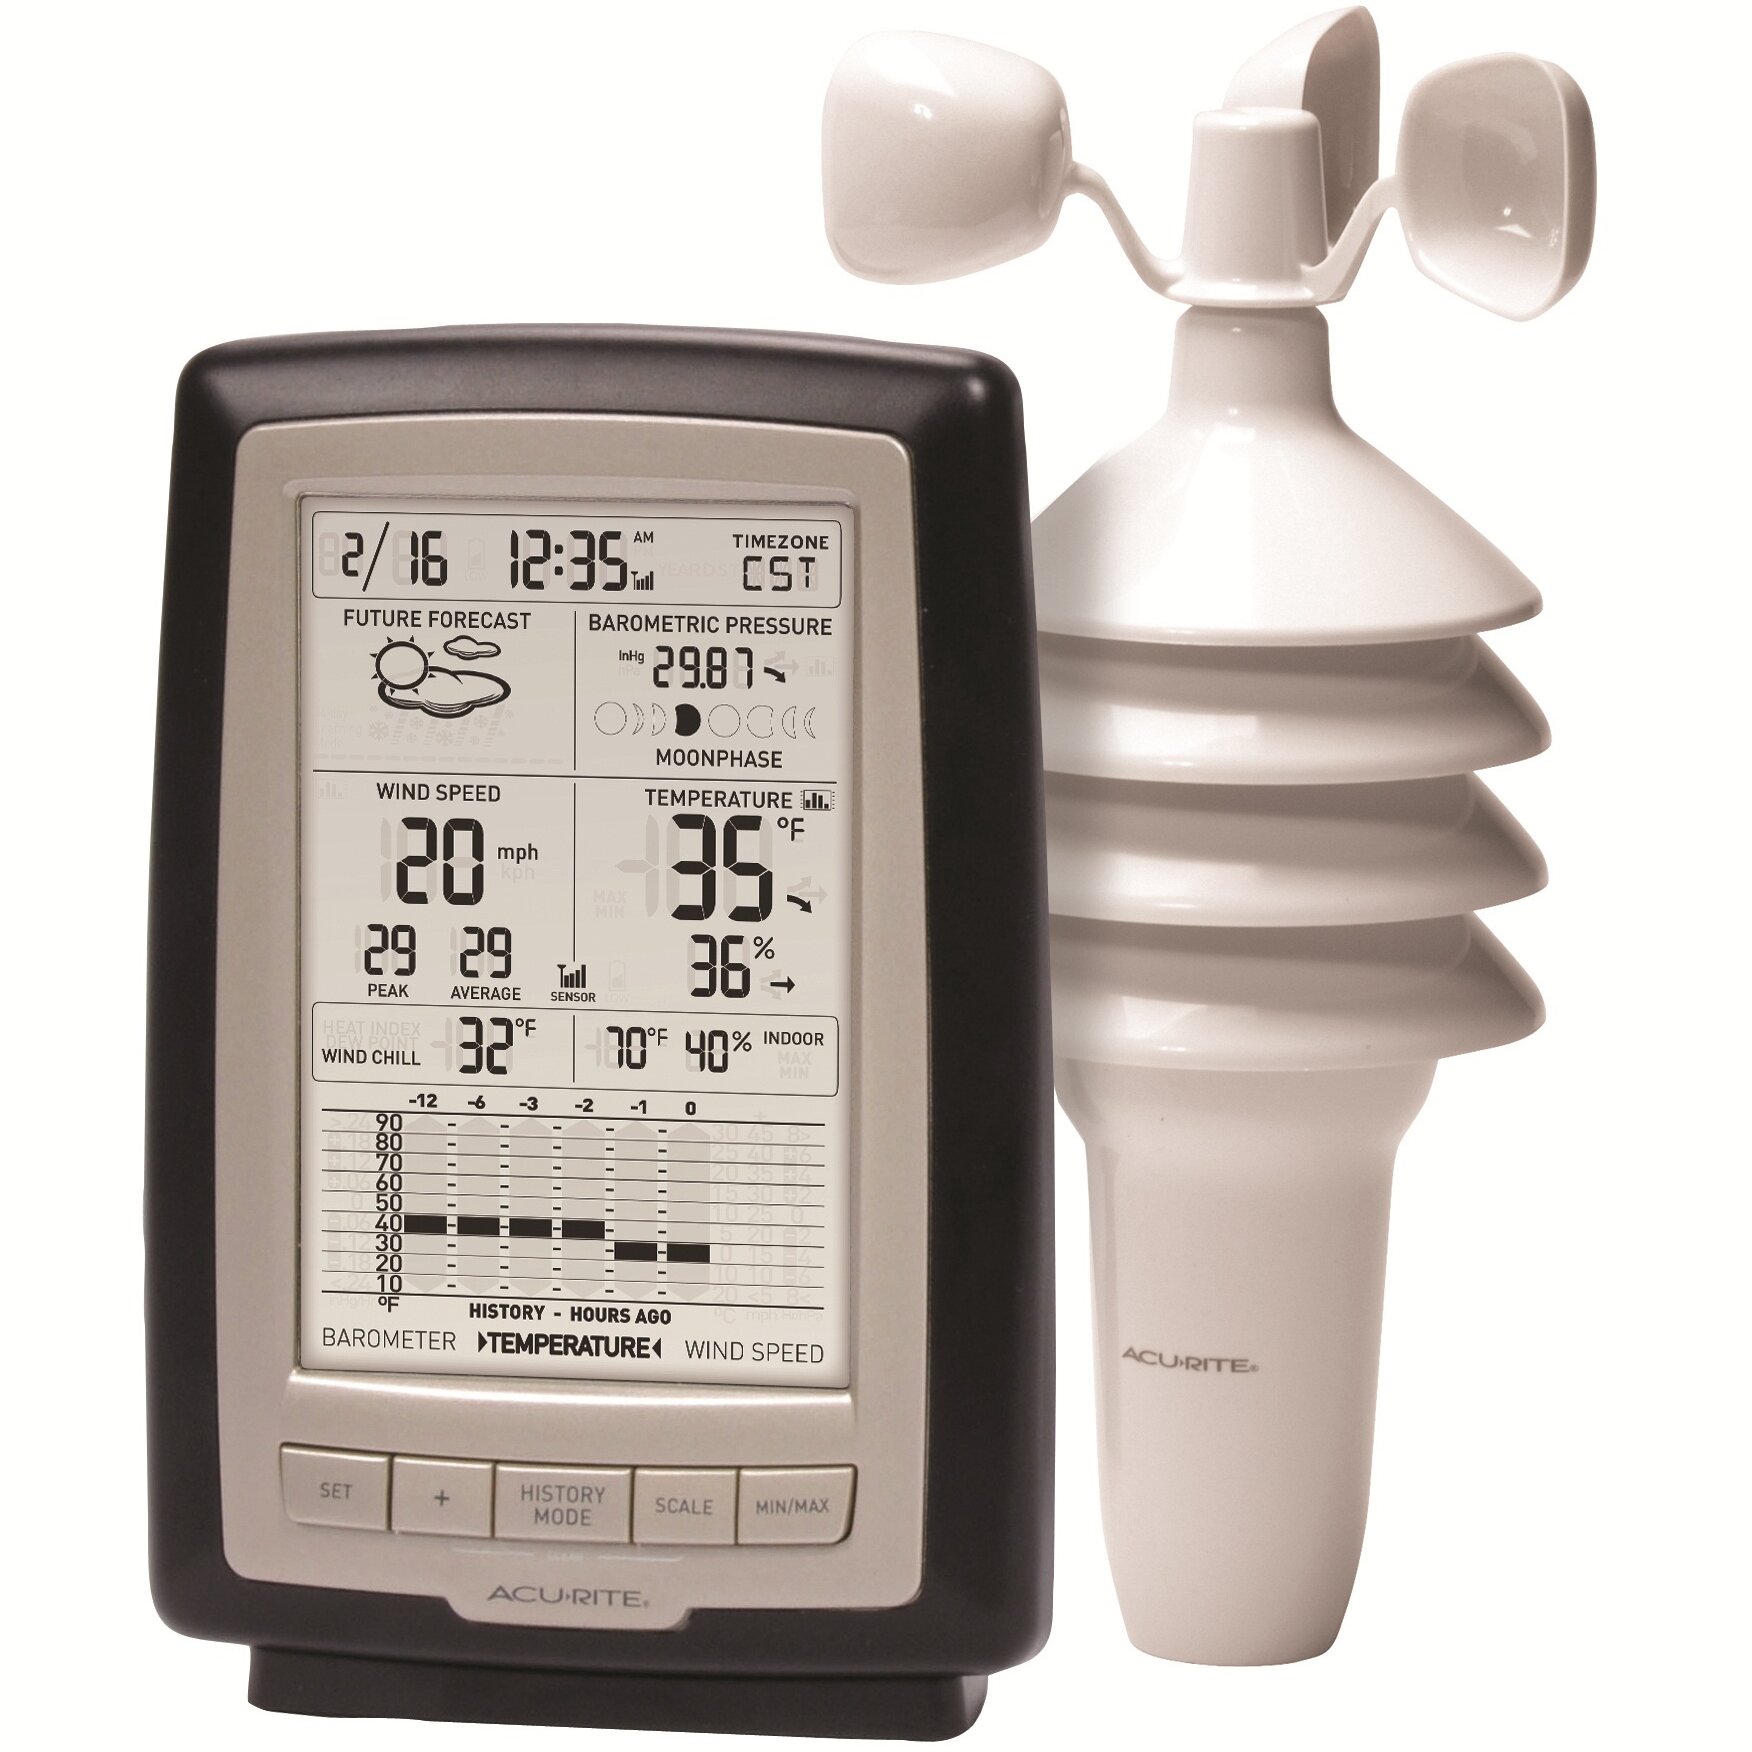 View Acurite My Backyard Weather Pictures - Acurite Wireless Center Digital Weather Station